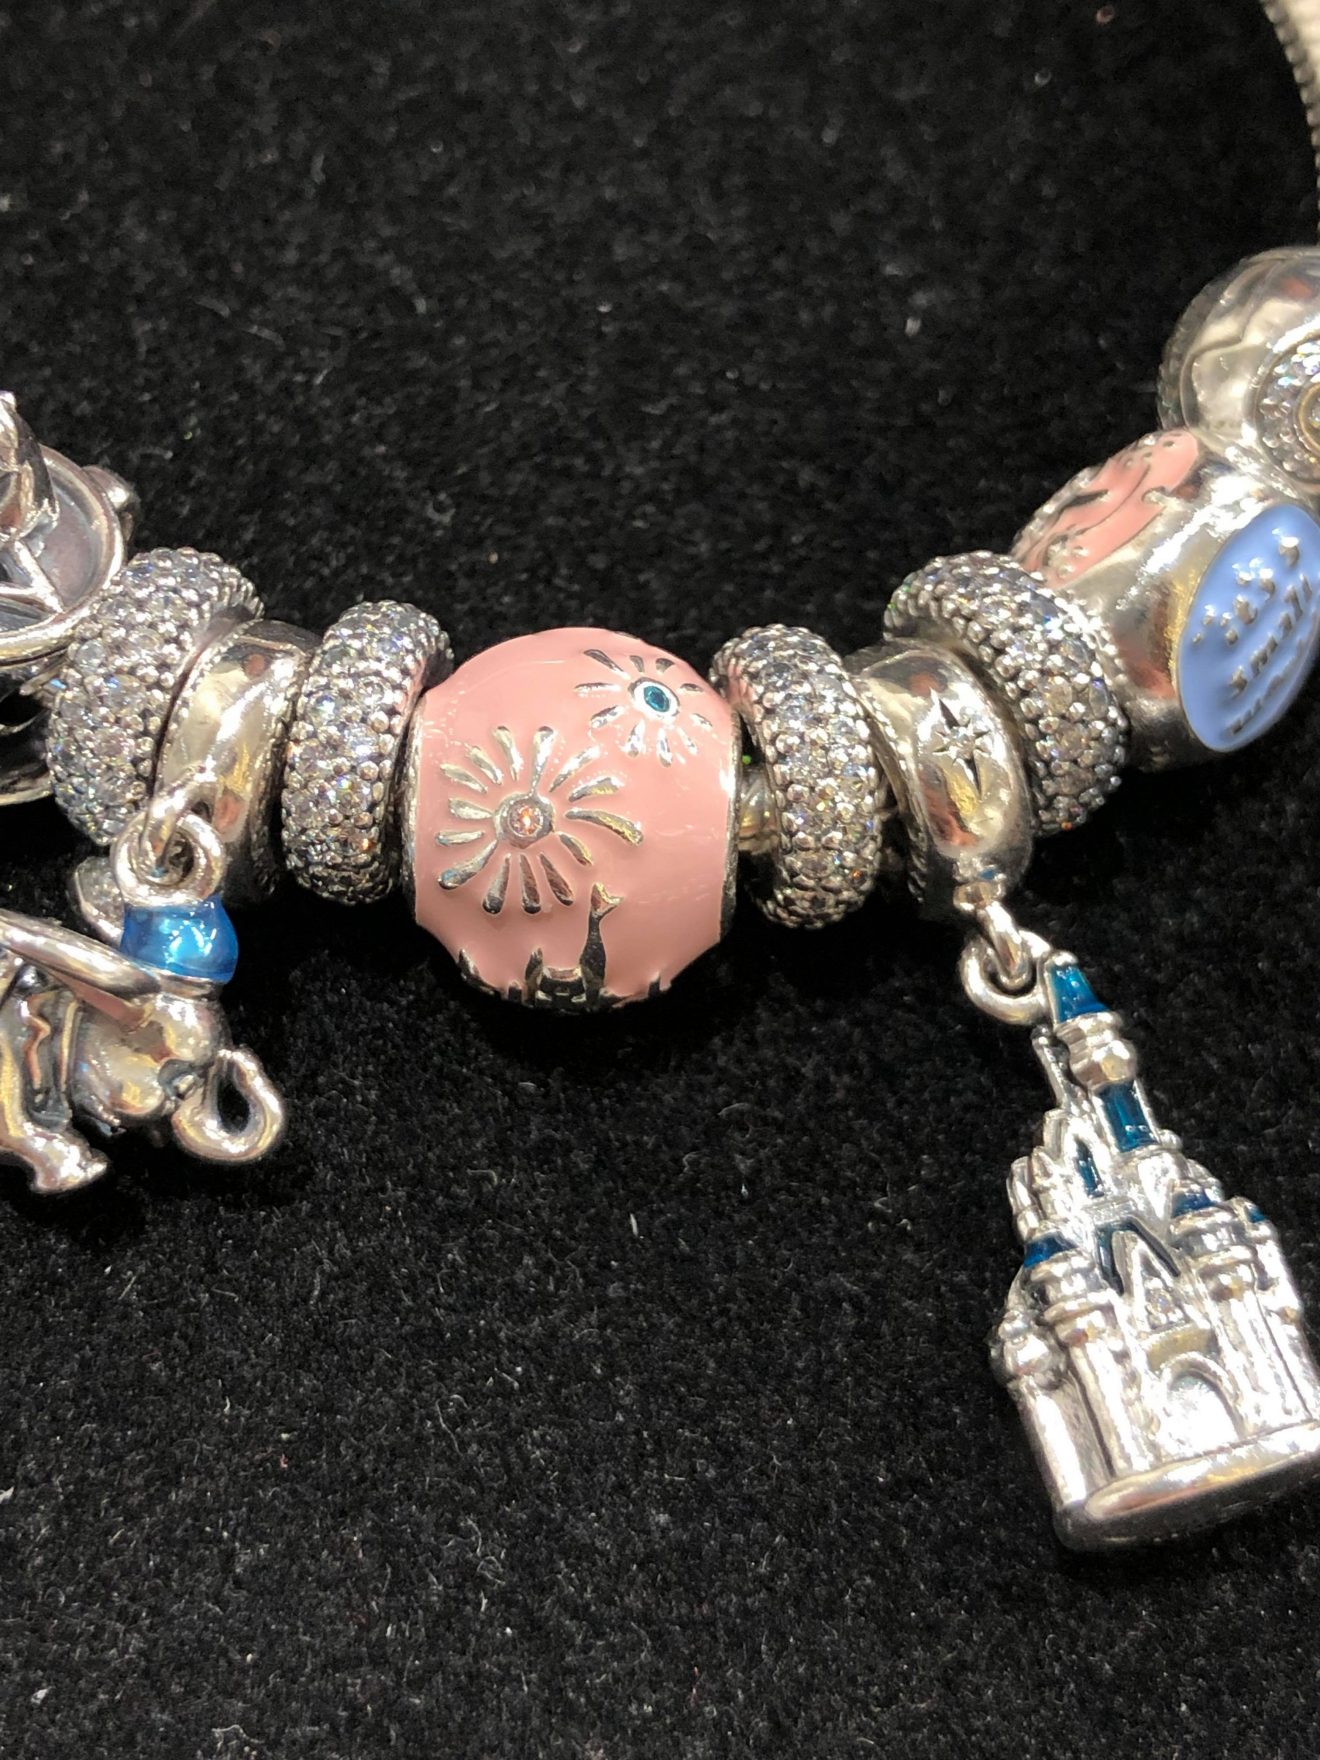 The 2019 Disney Parks Exclusive Pandora Charm Is Here